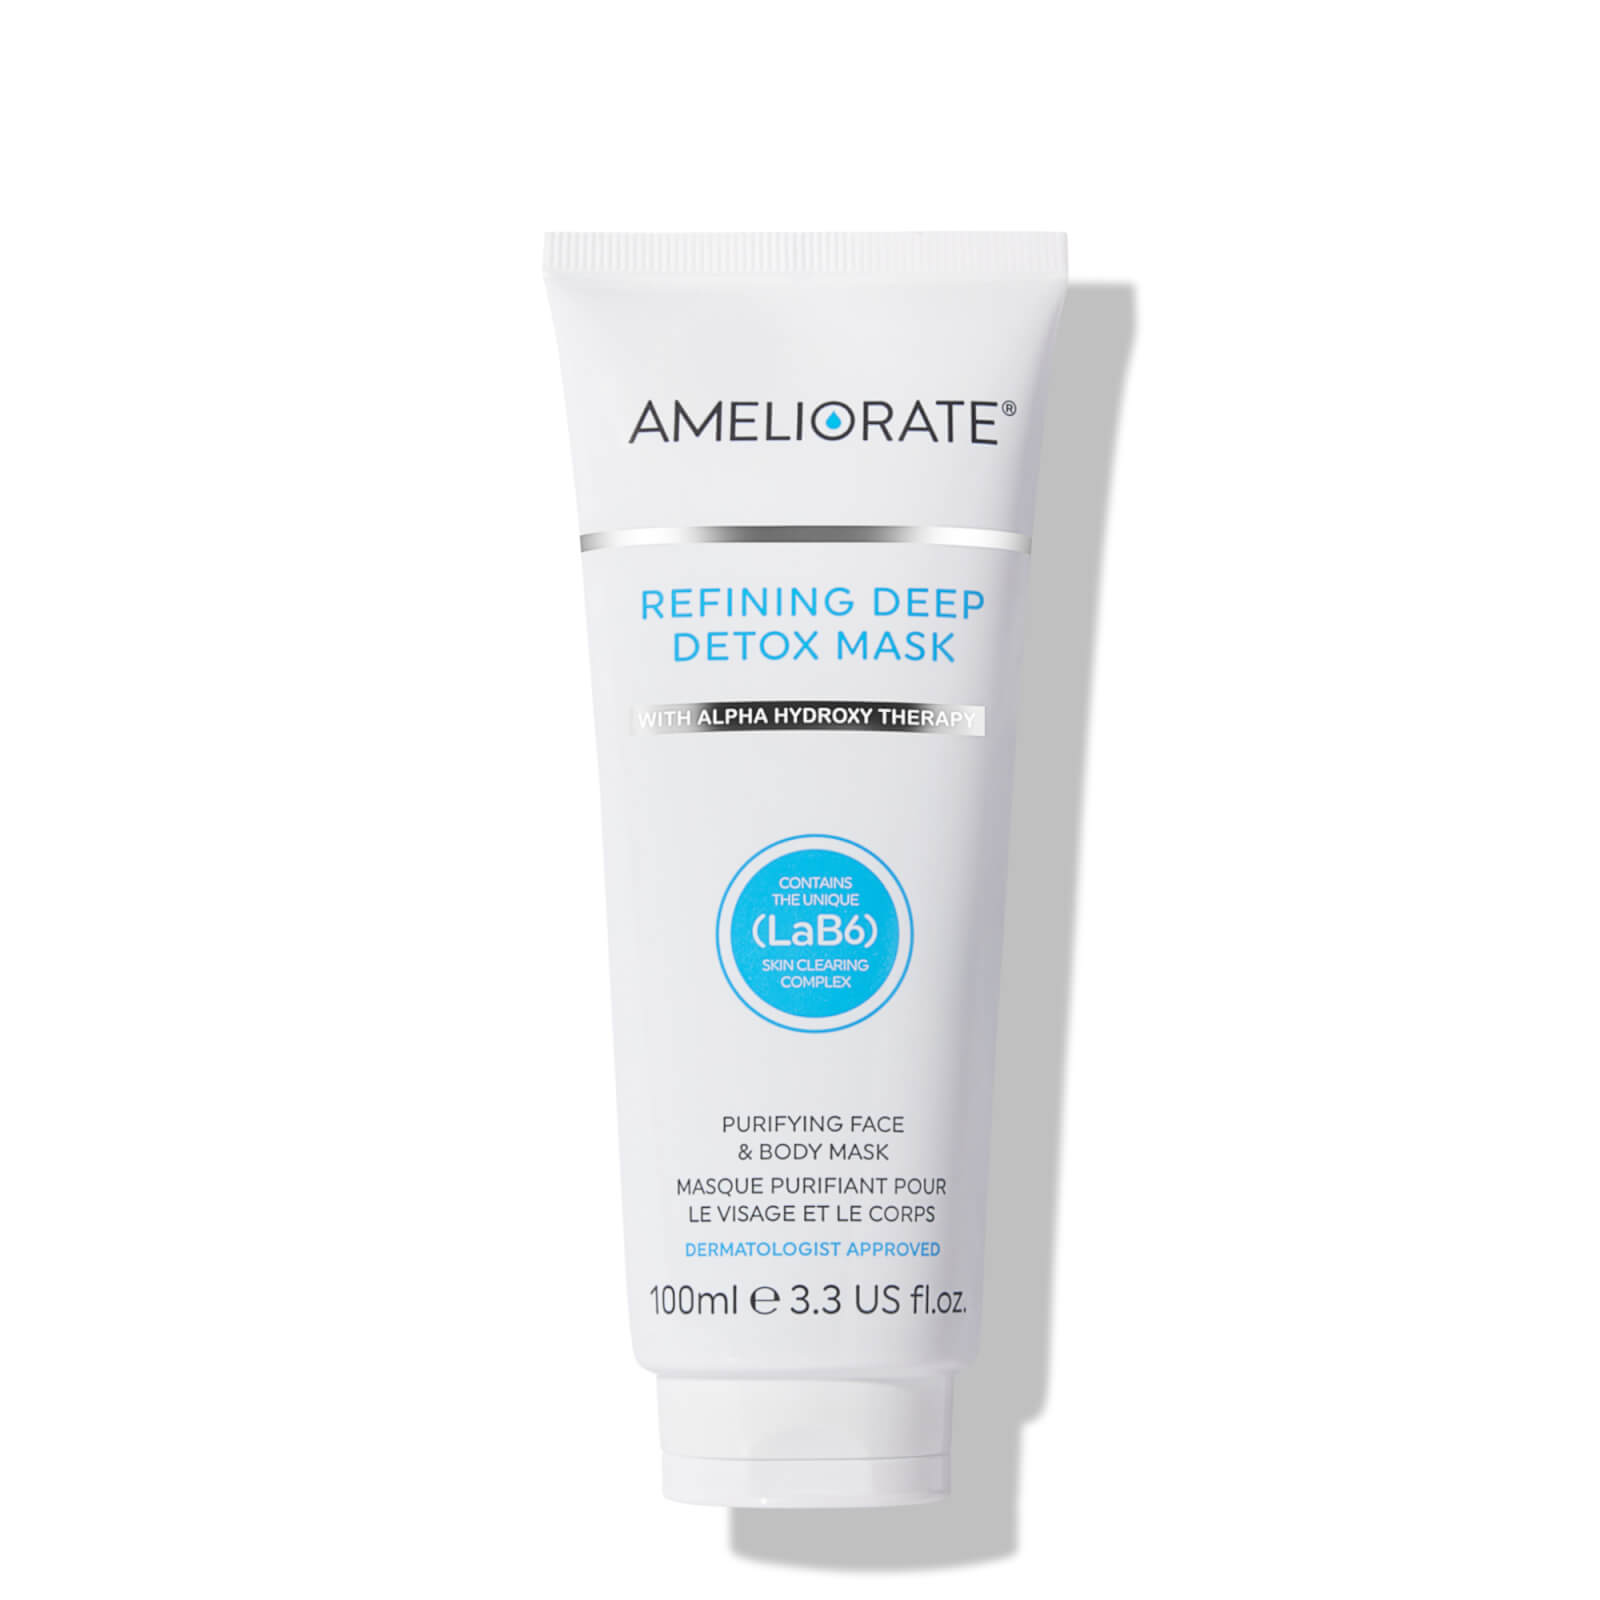 Ameliorate Refining Deep Detox Mask 100ml In White